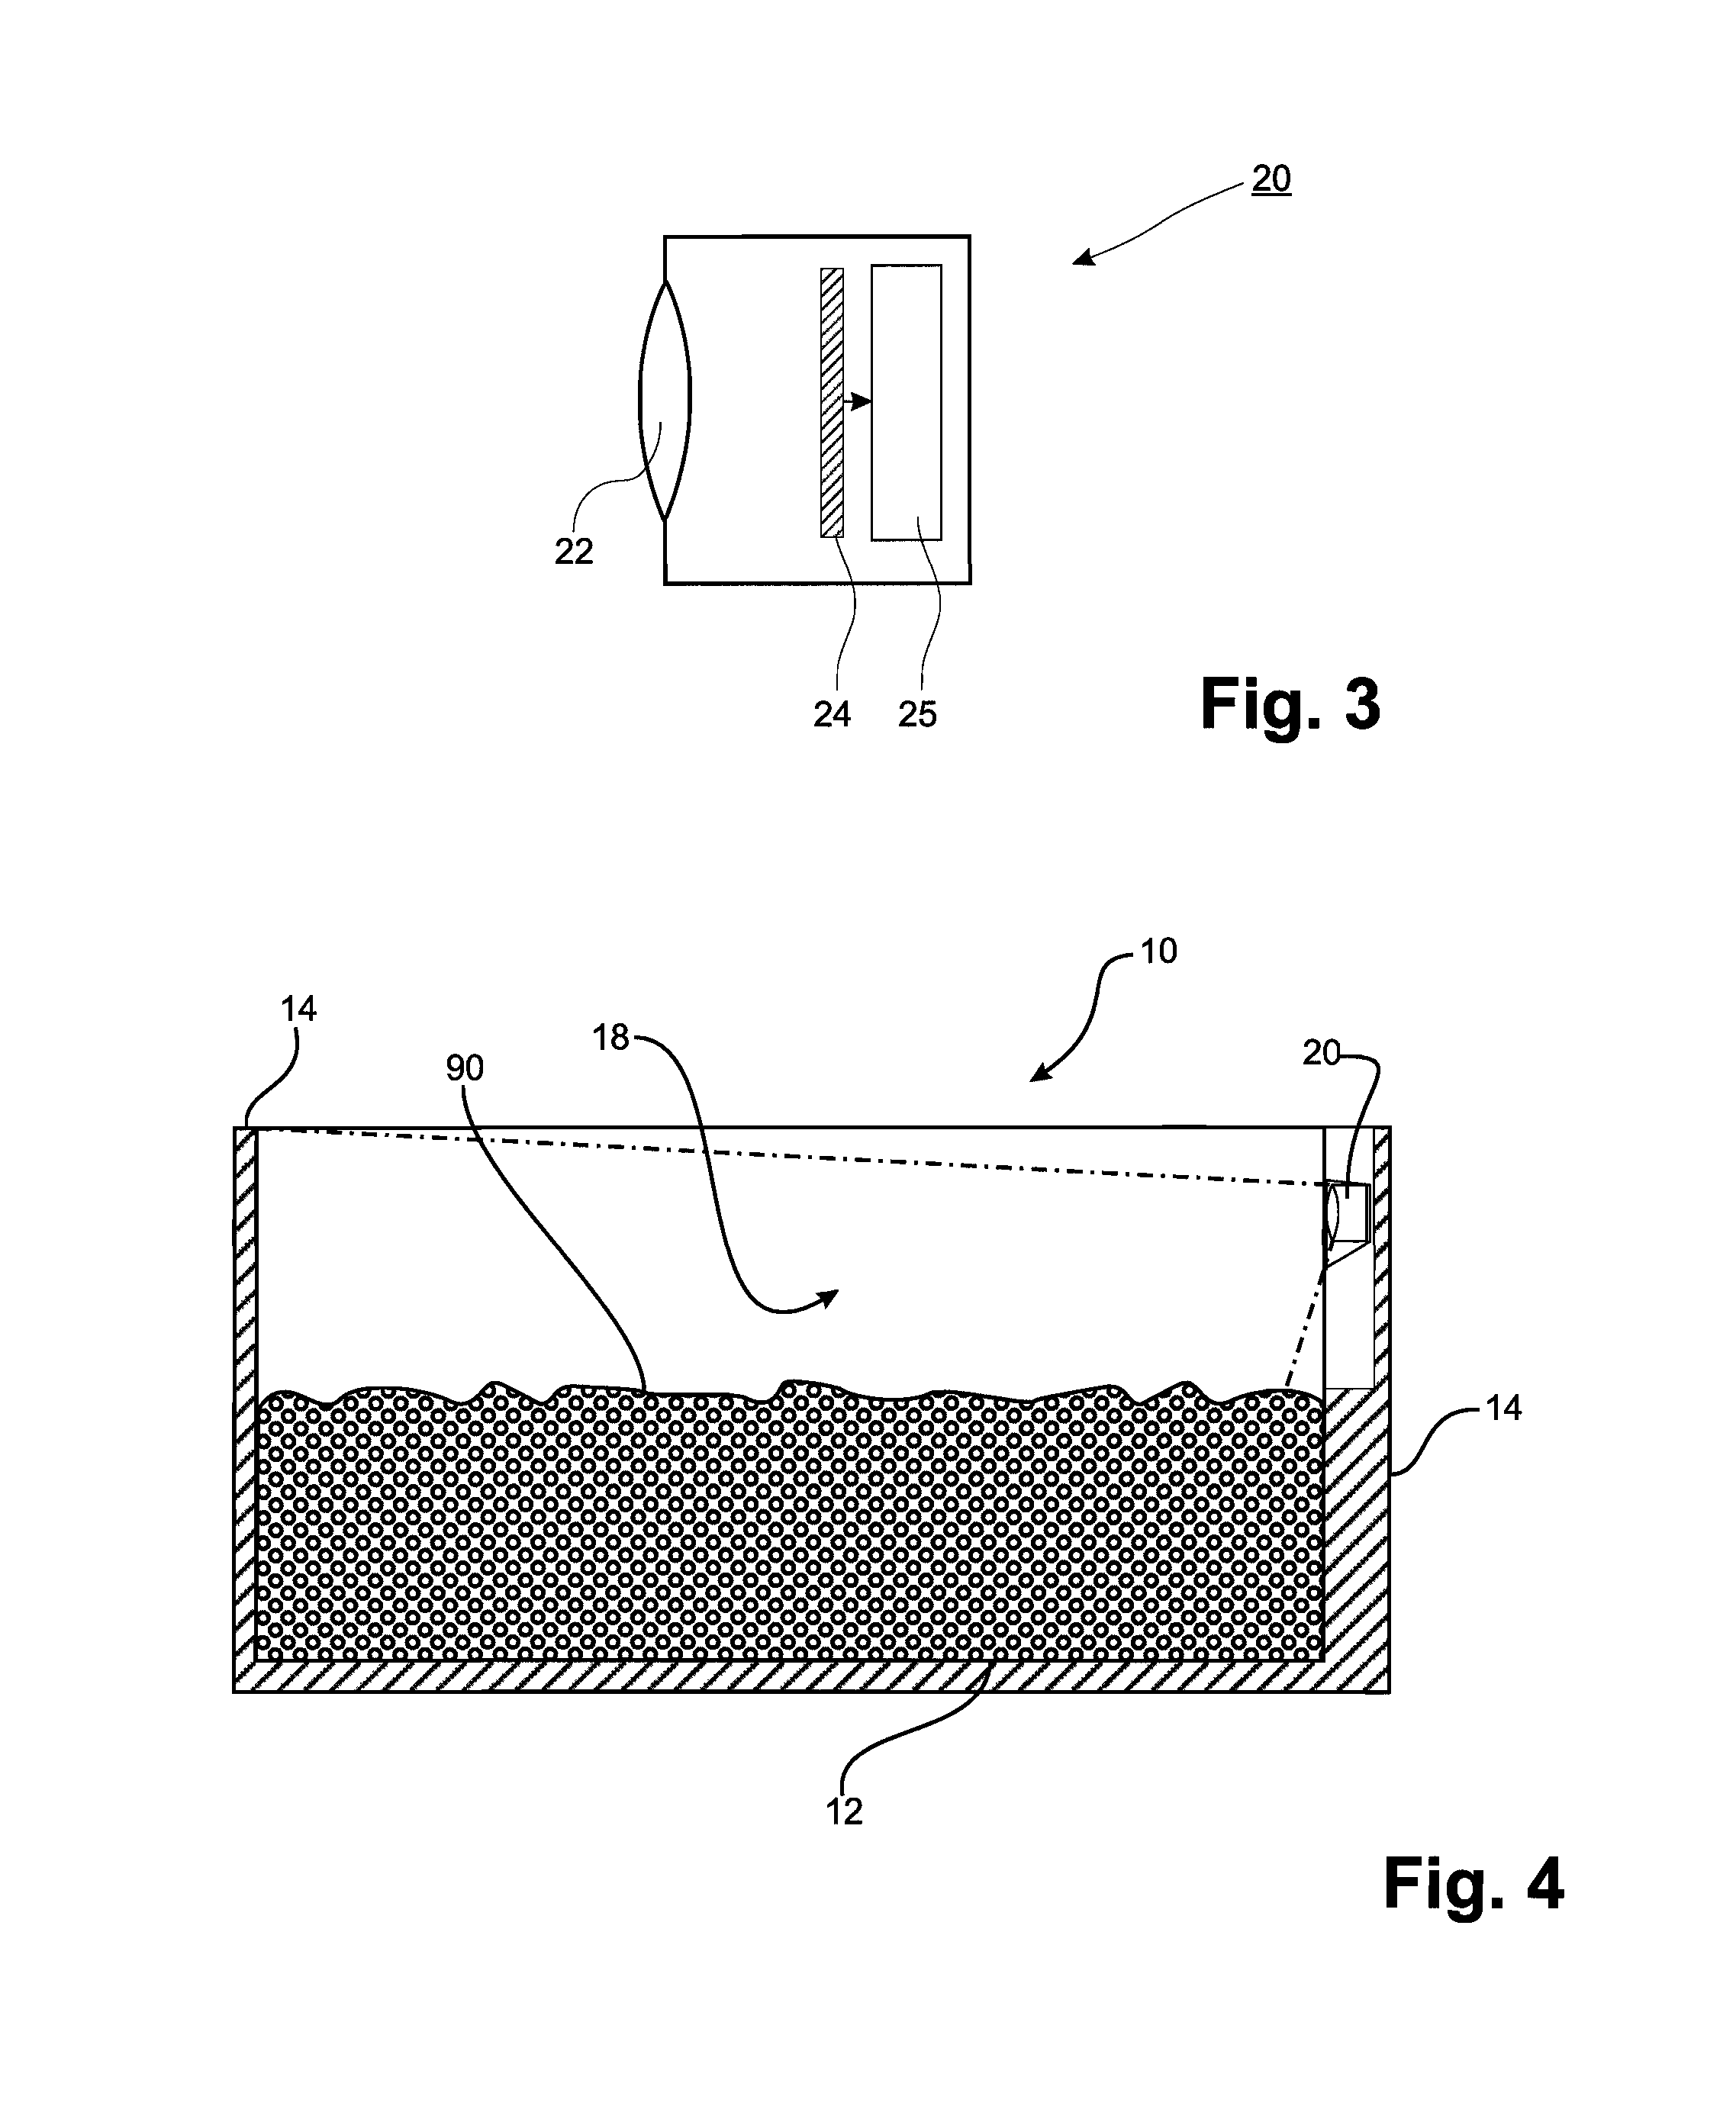 Method for dynamically detecting the fill level of a container, container therefor, and system for dynamically monitoring the fill level of a plurality of containers